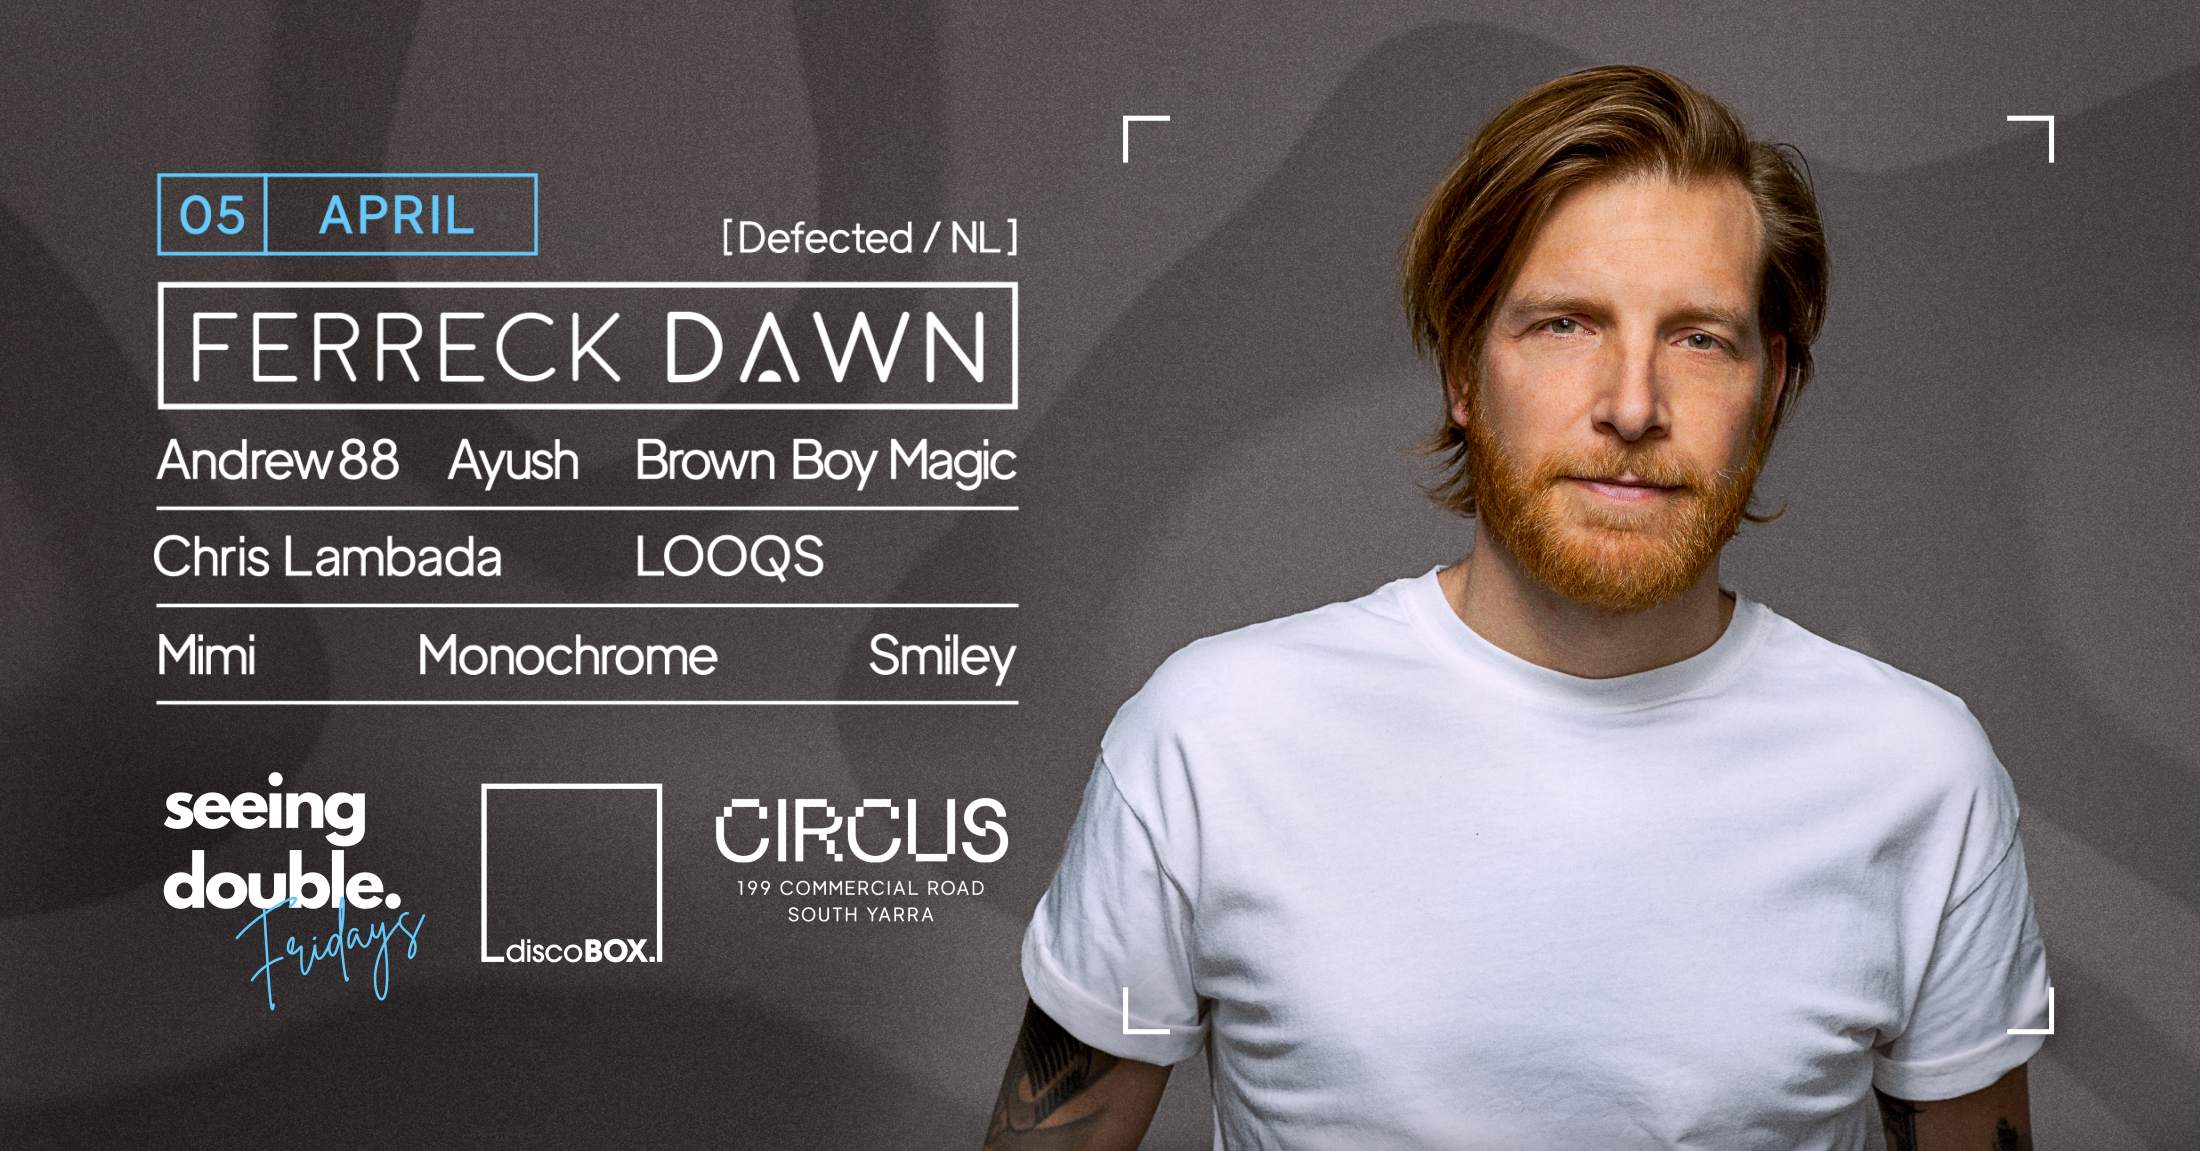 Ferreck Dawn (Defected/NL) at Circus - Seeing Double & discoBOX - Página trasera